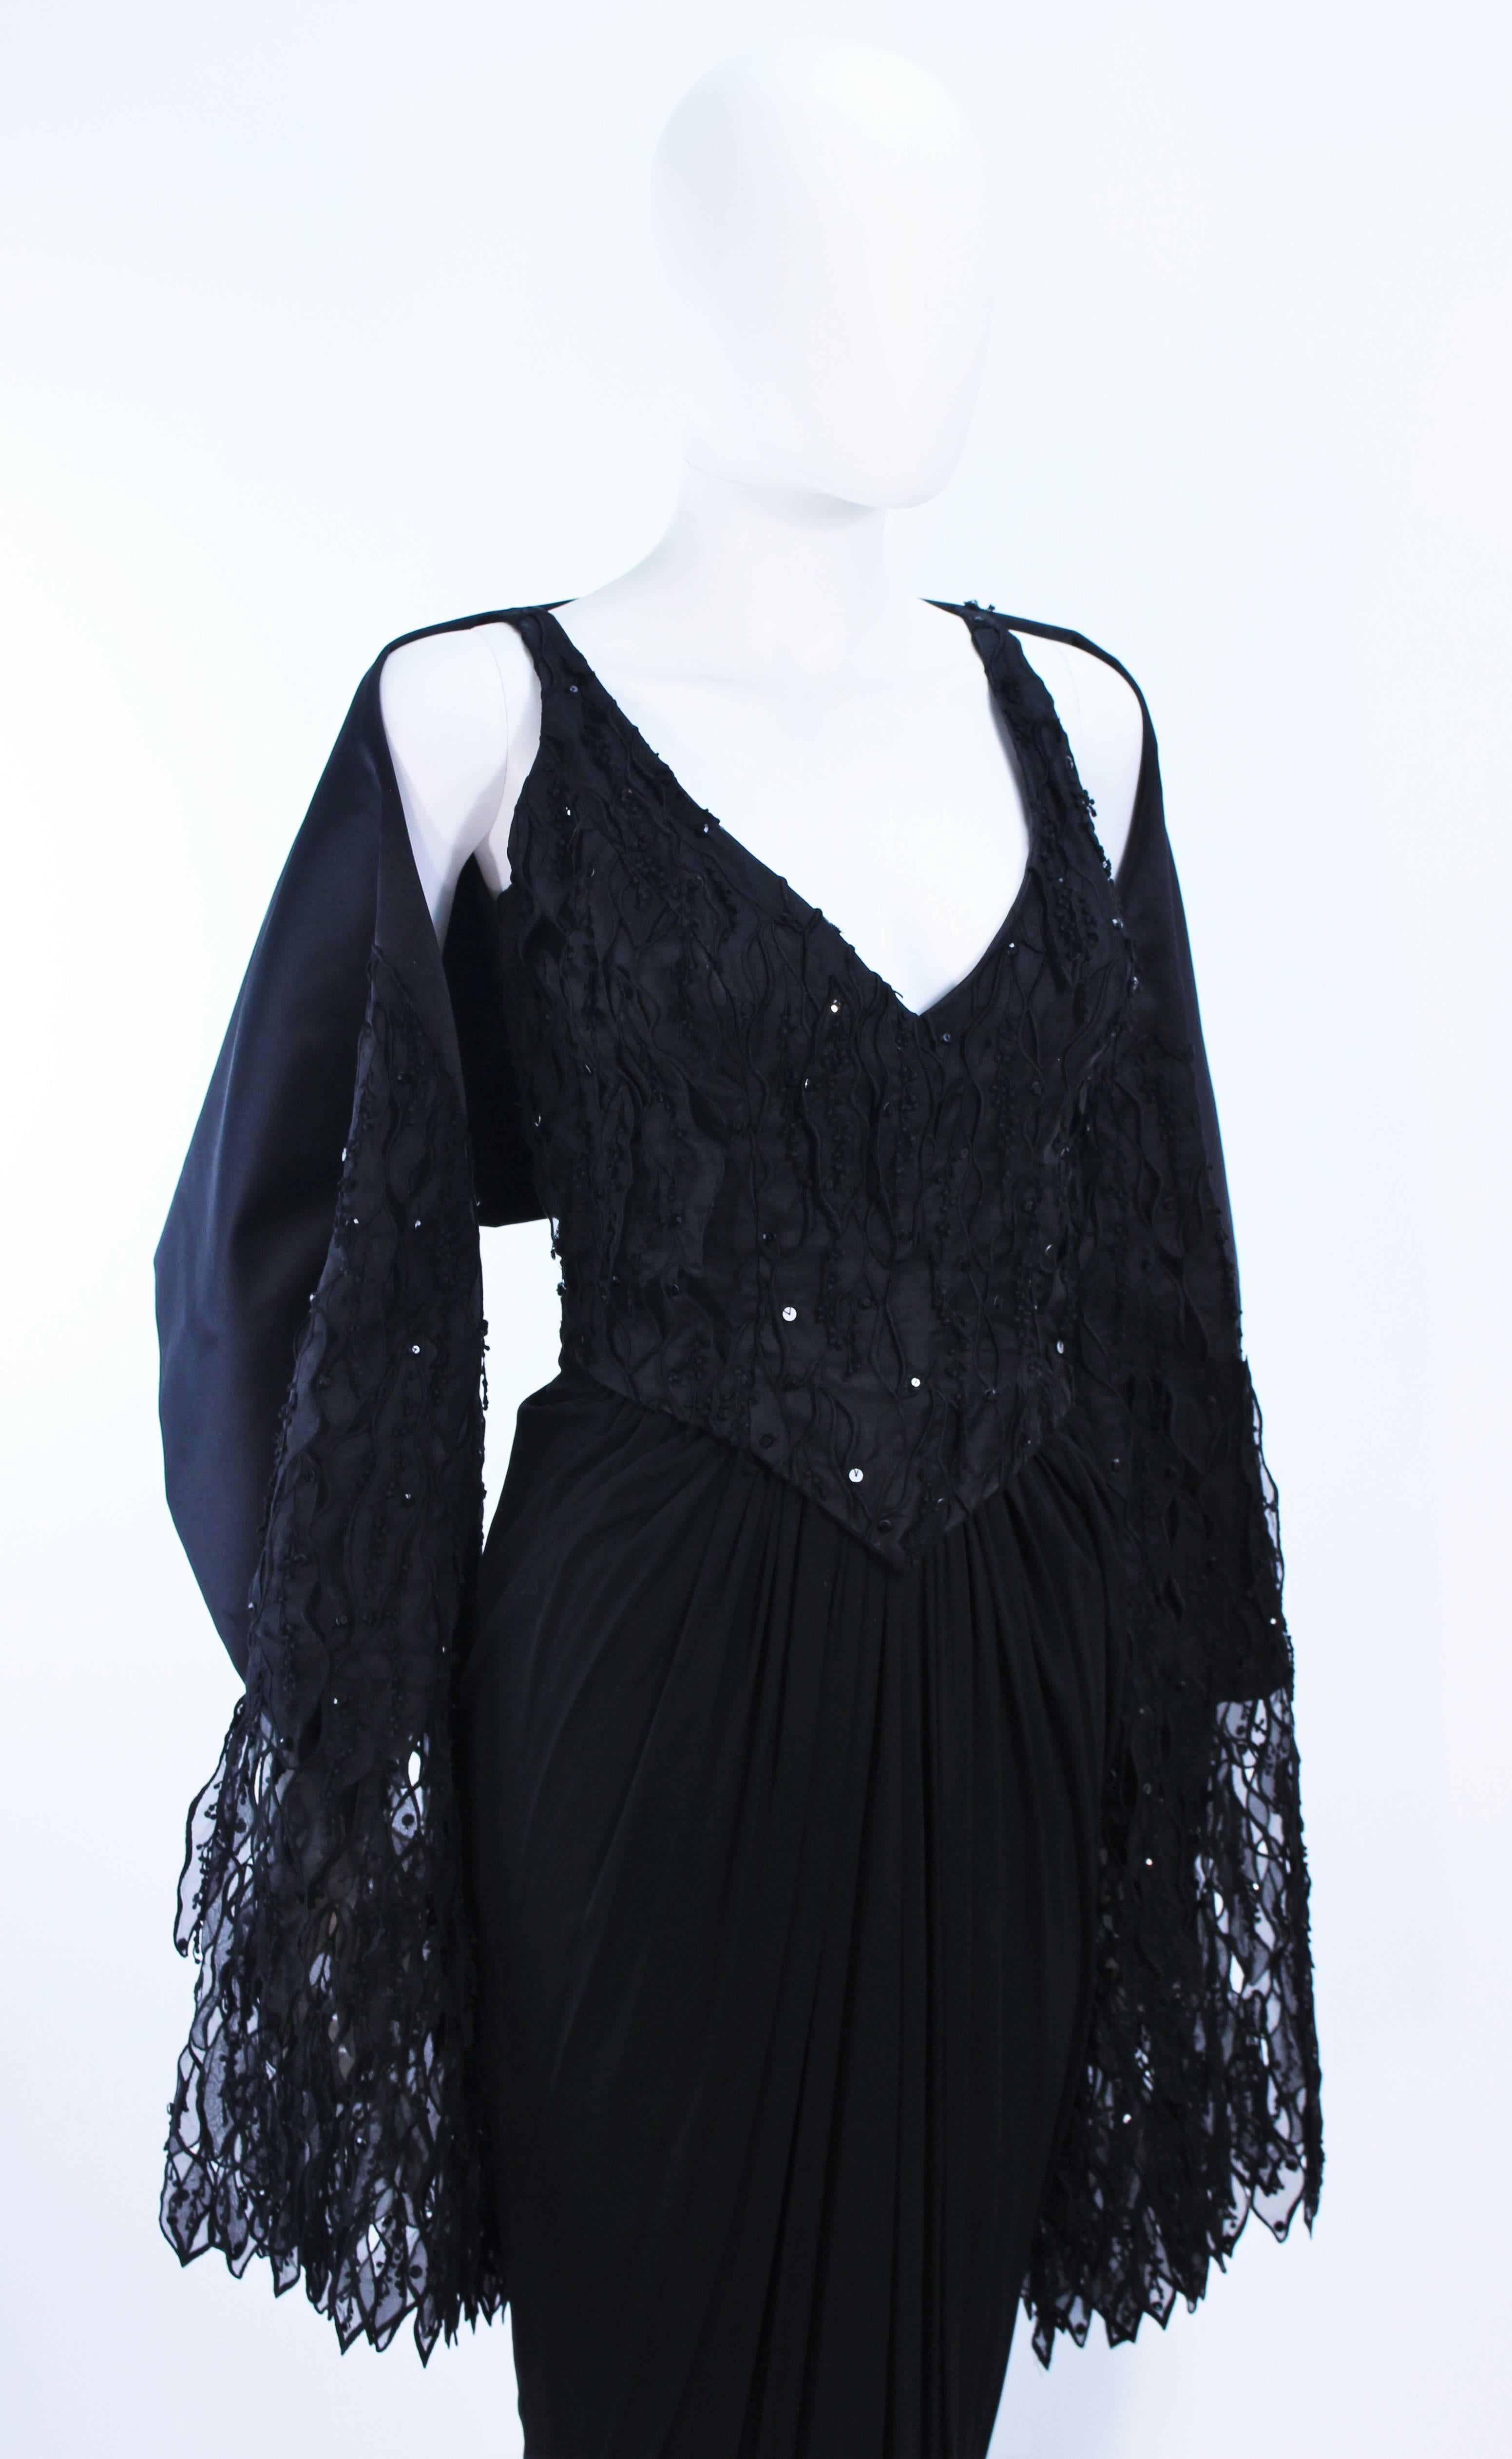 Vintage 1960's Black Silk Jersey Gown with Floral Applique & Rhinestones Size 4 For Sale 1